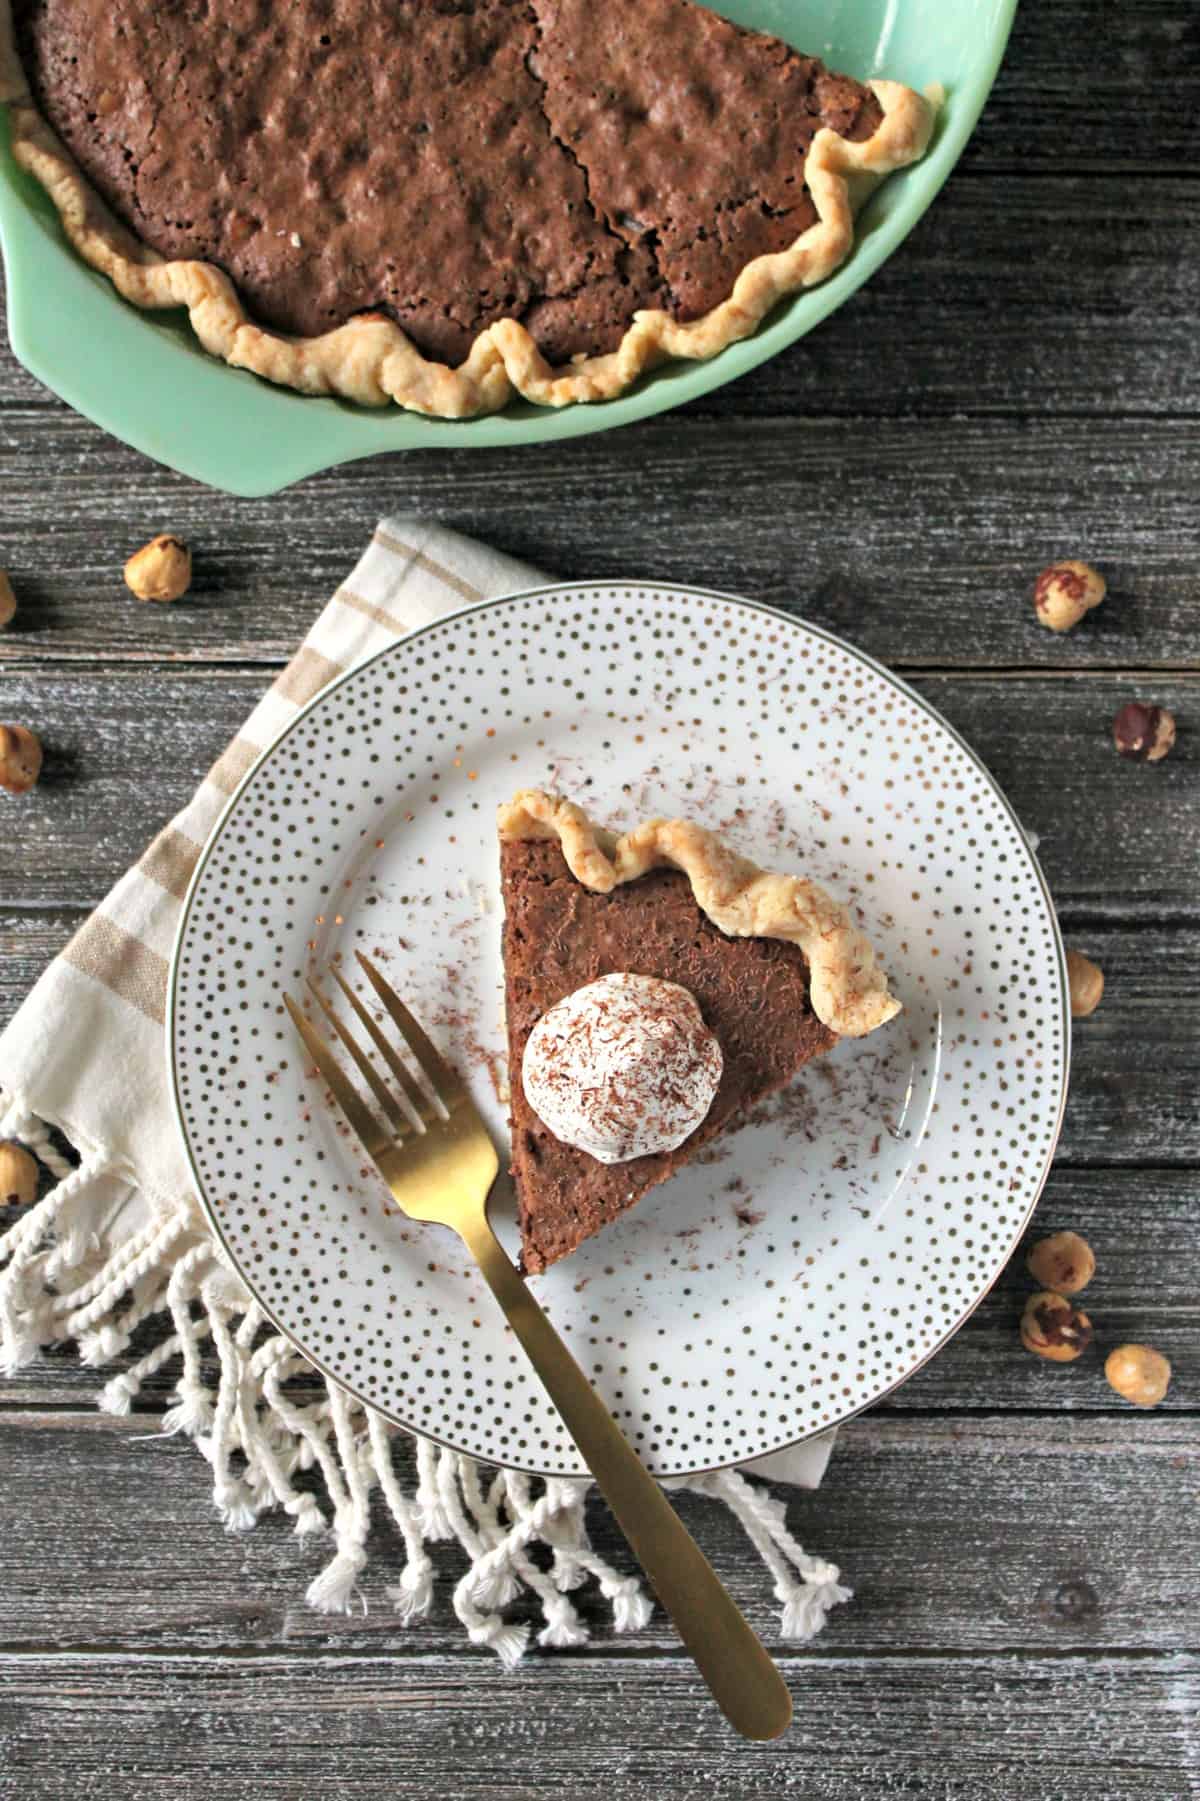 Hazelnut Chocolate Chunk Pie with Yogurt Whipped Cream! Not a fan of traditional pies? This fudgey version is filled with chocolate chunks & hazelnuts!